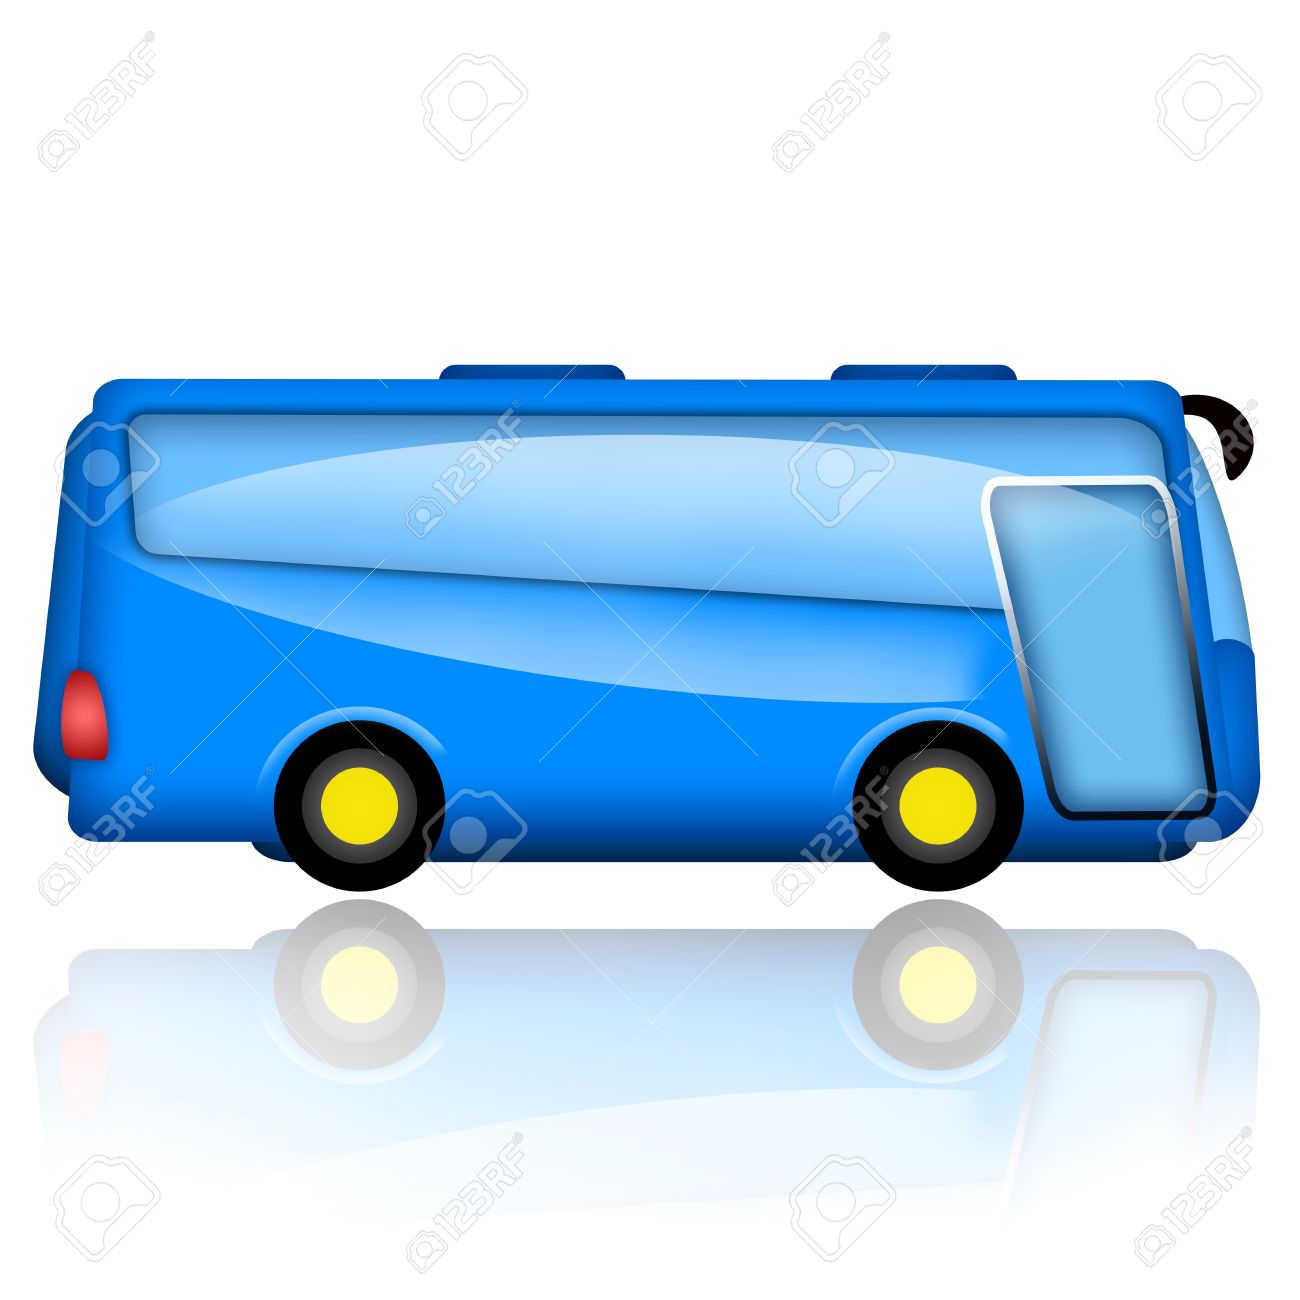 6,964 Service Bus Stock Vector Illustration And Royalty Free.